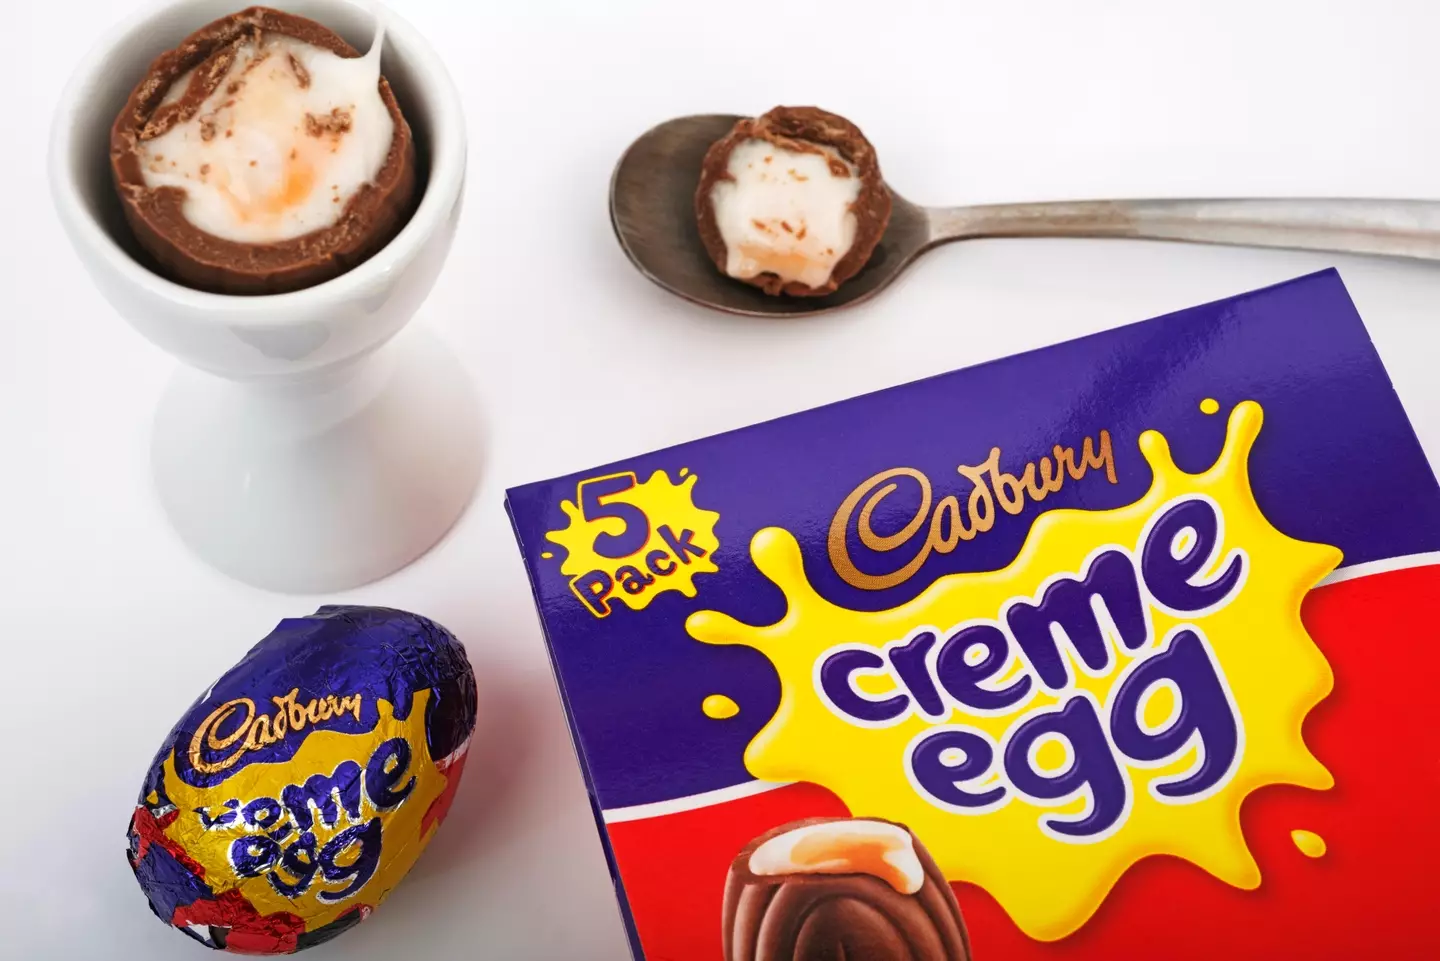 A box of five Creme Eggs has been reduced to 87p at Lidl.